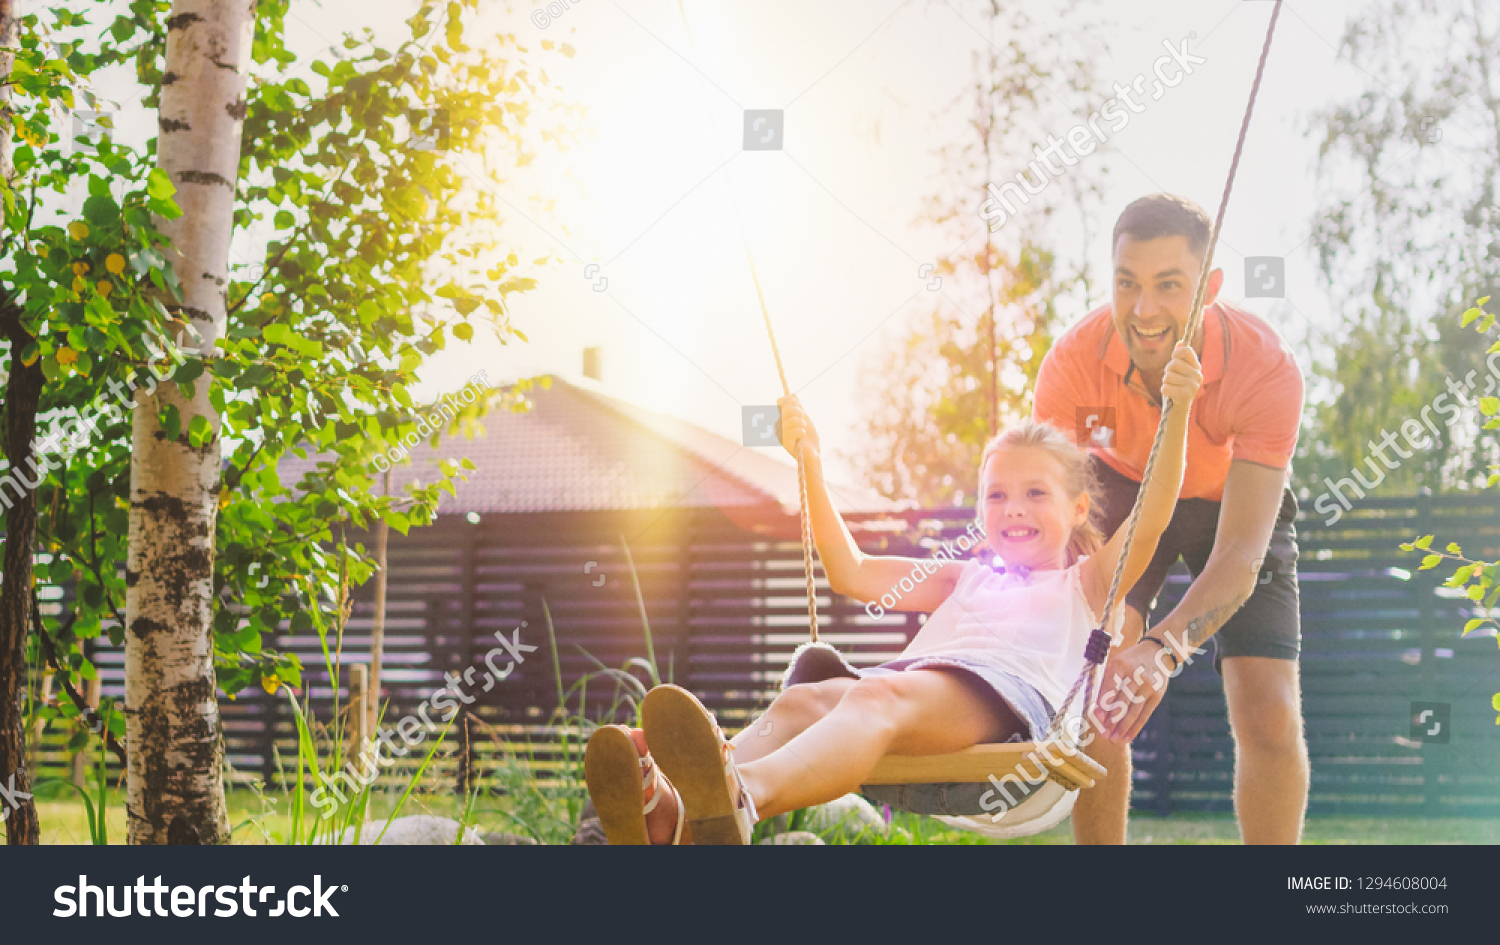 Joyous Father Pushes Swings with His Cute Little Daughter on Them. Happy Family Spends Time Together one Sunny Summer Day in the Idyllics Backyard. #1294608004